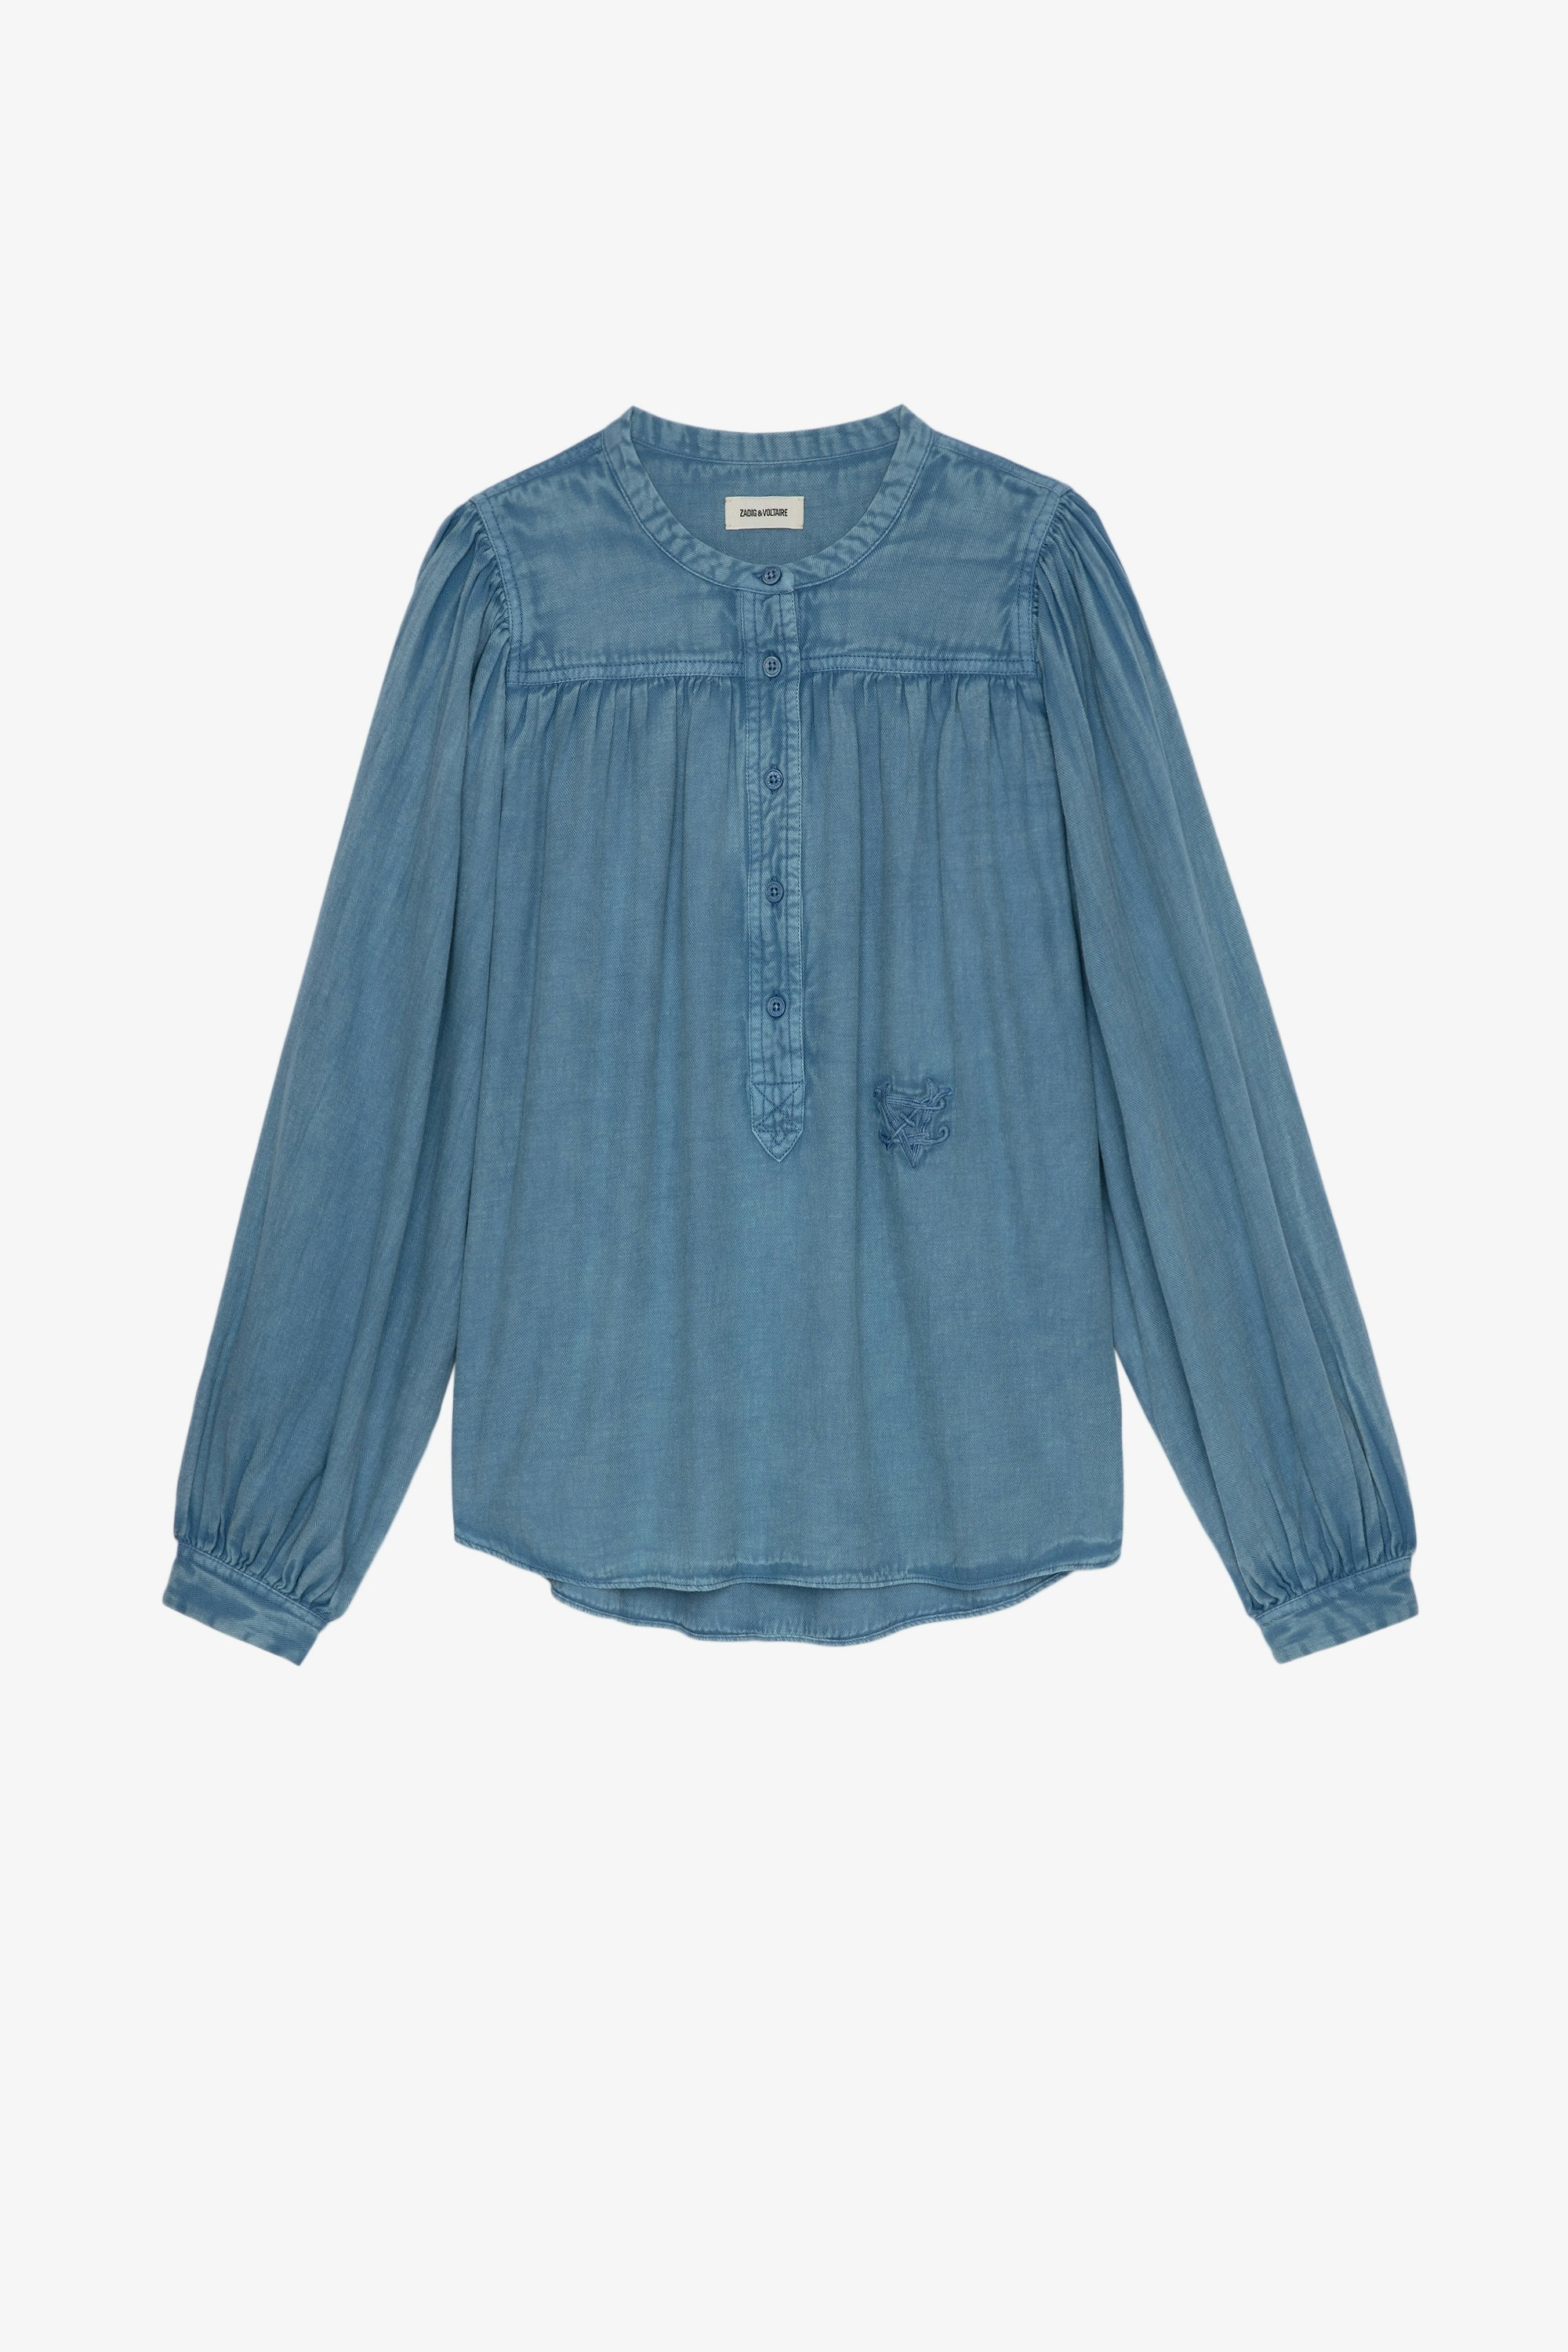 Tigy Cotton Twill ブルーズ Women's long-sleeved sky blue cotton blouse 